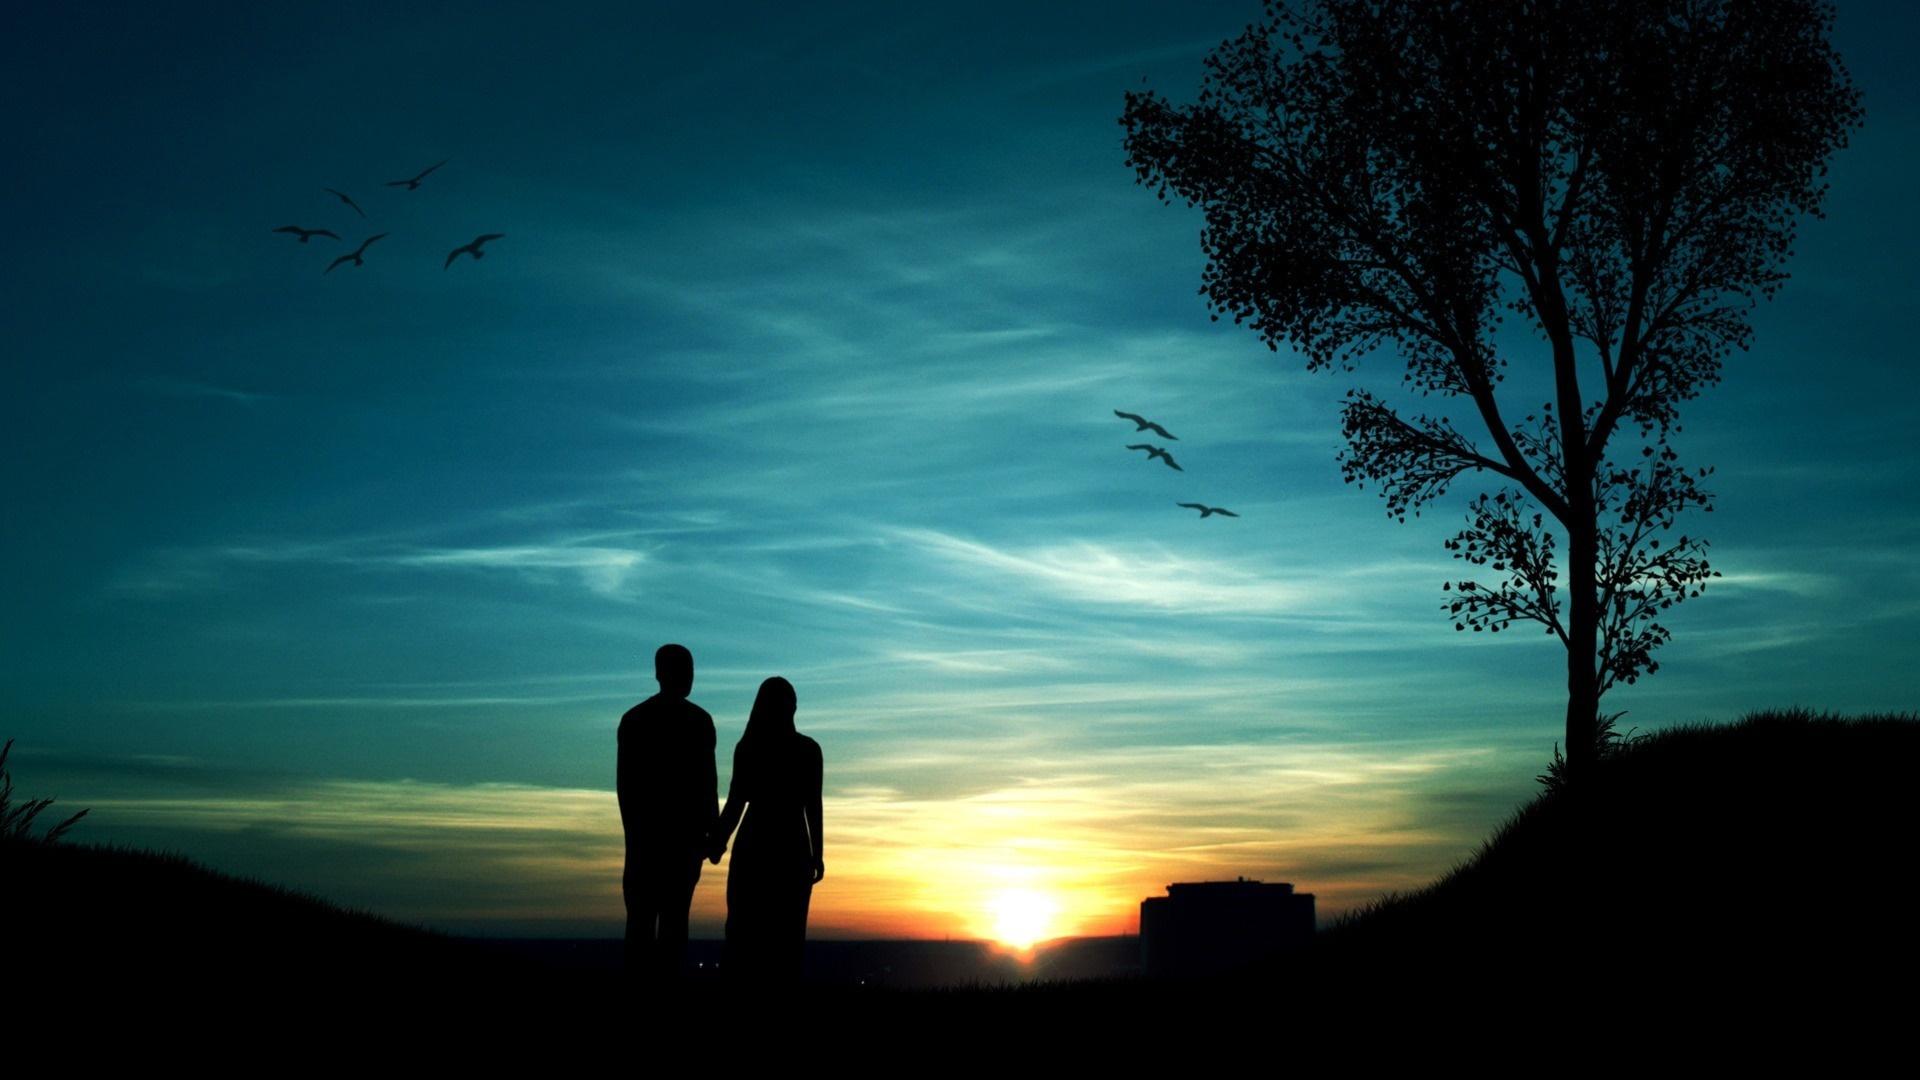 Wallpapers Romantic evening, couples, trees, birds, sunset